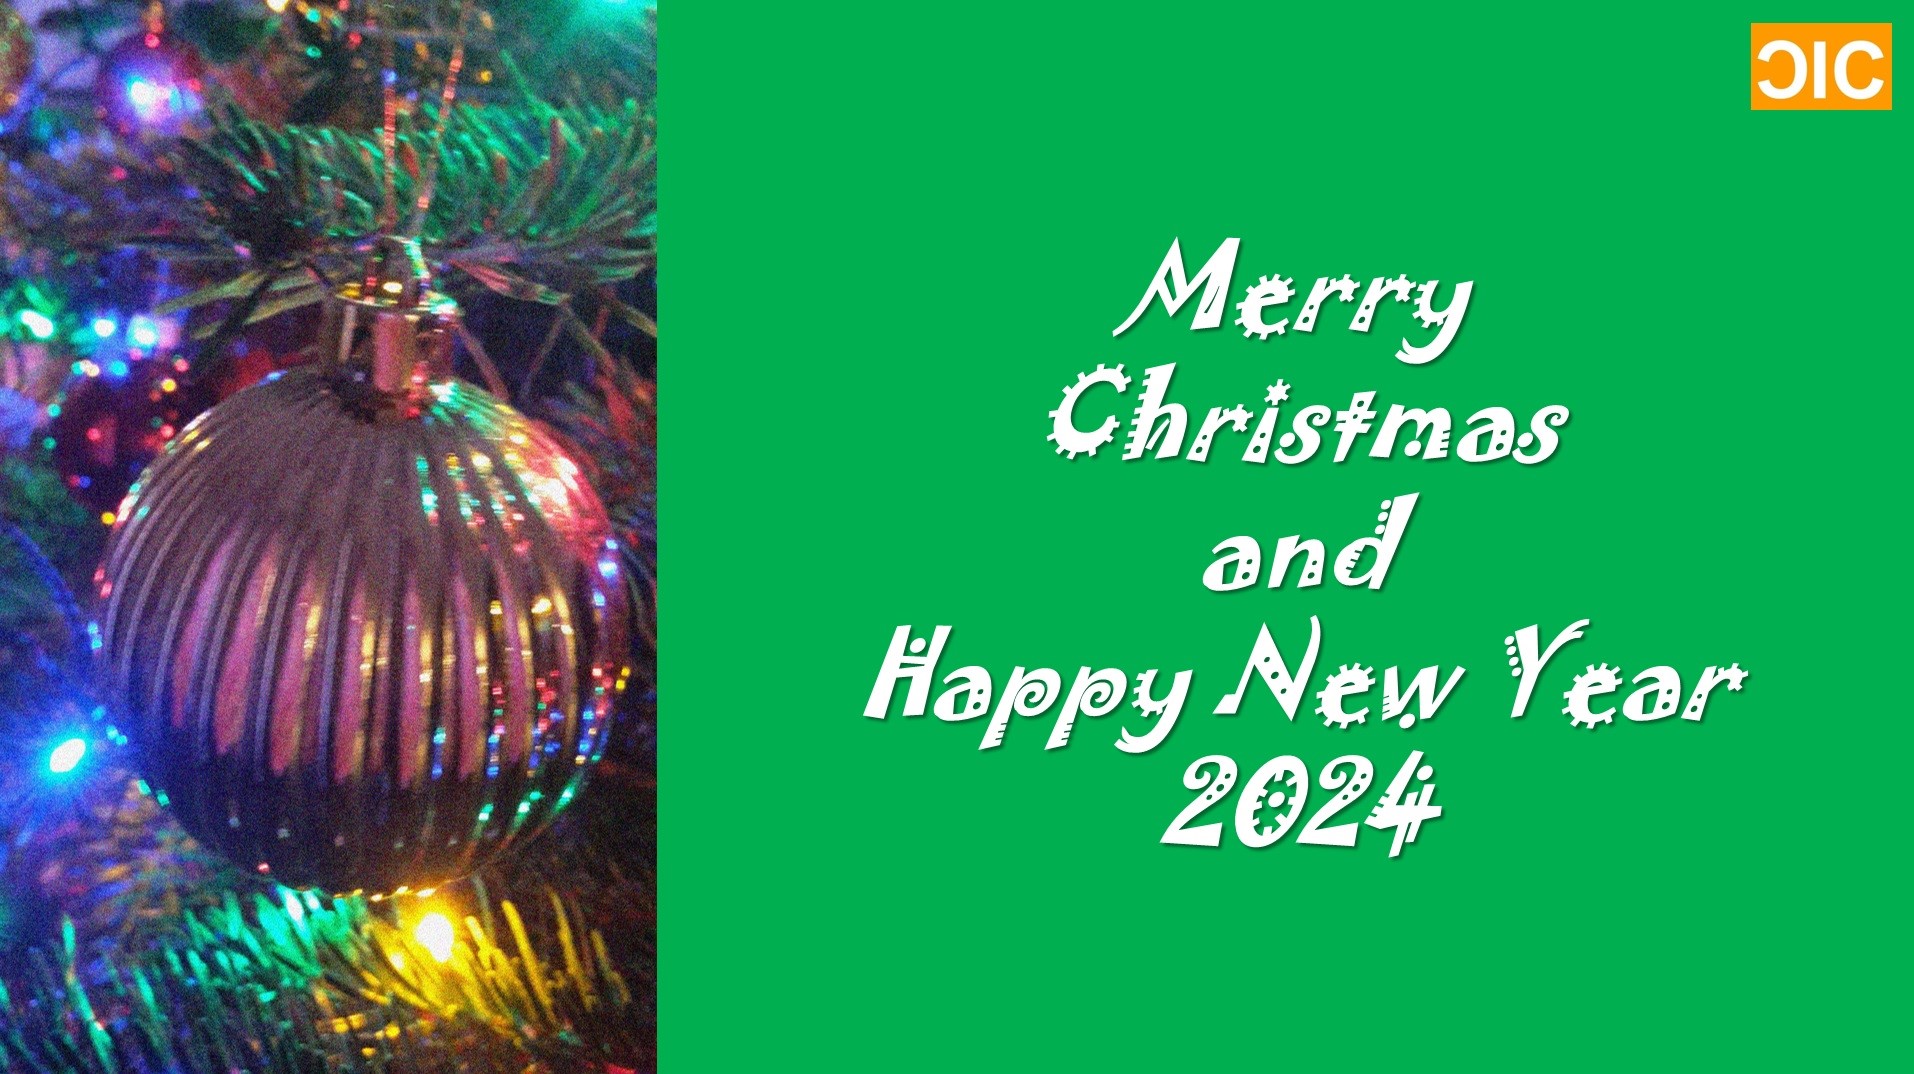 Merry Christmas and Happy New Year 2024 wishes Consumer Insight Consulting company